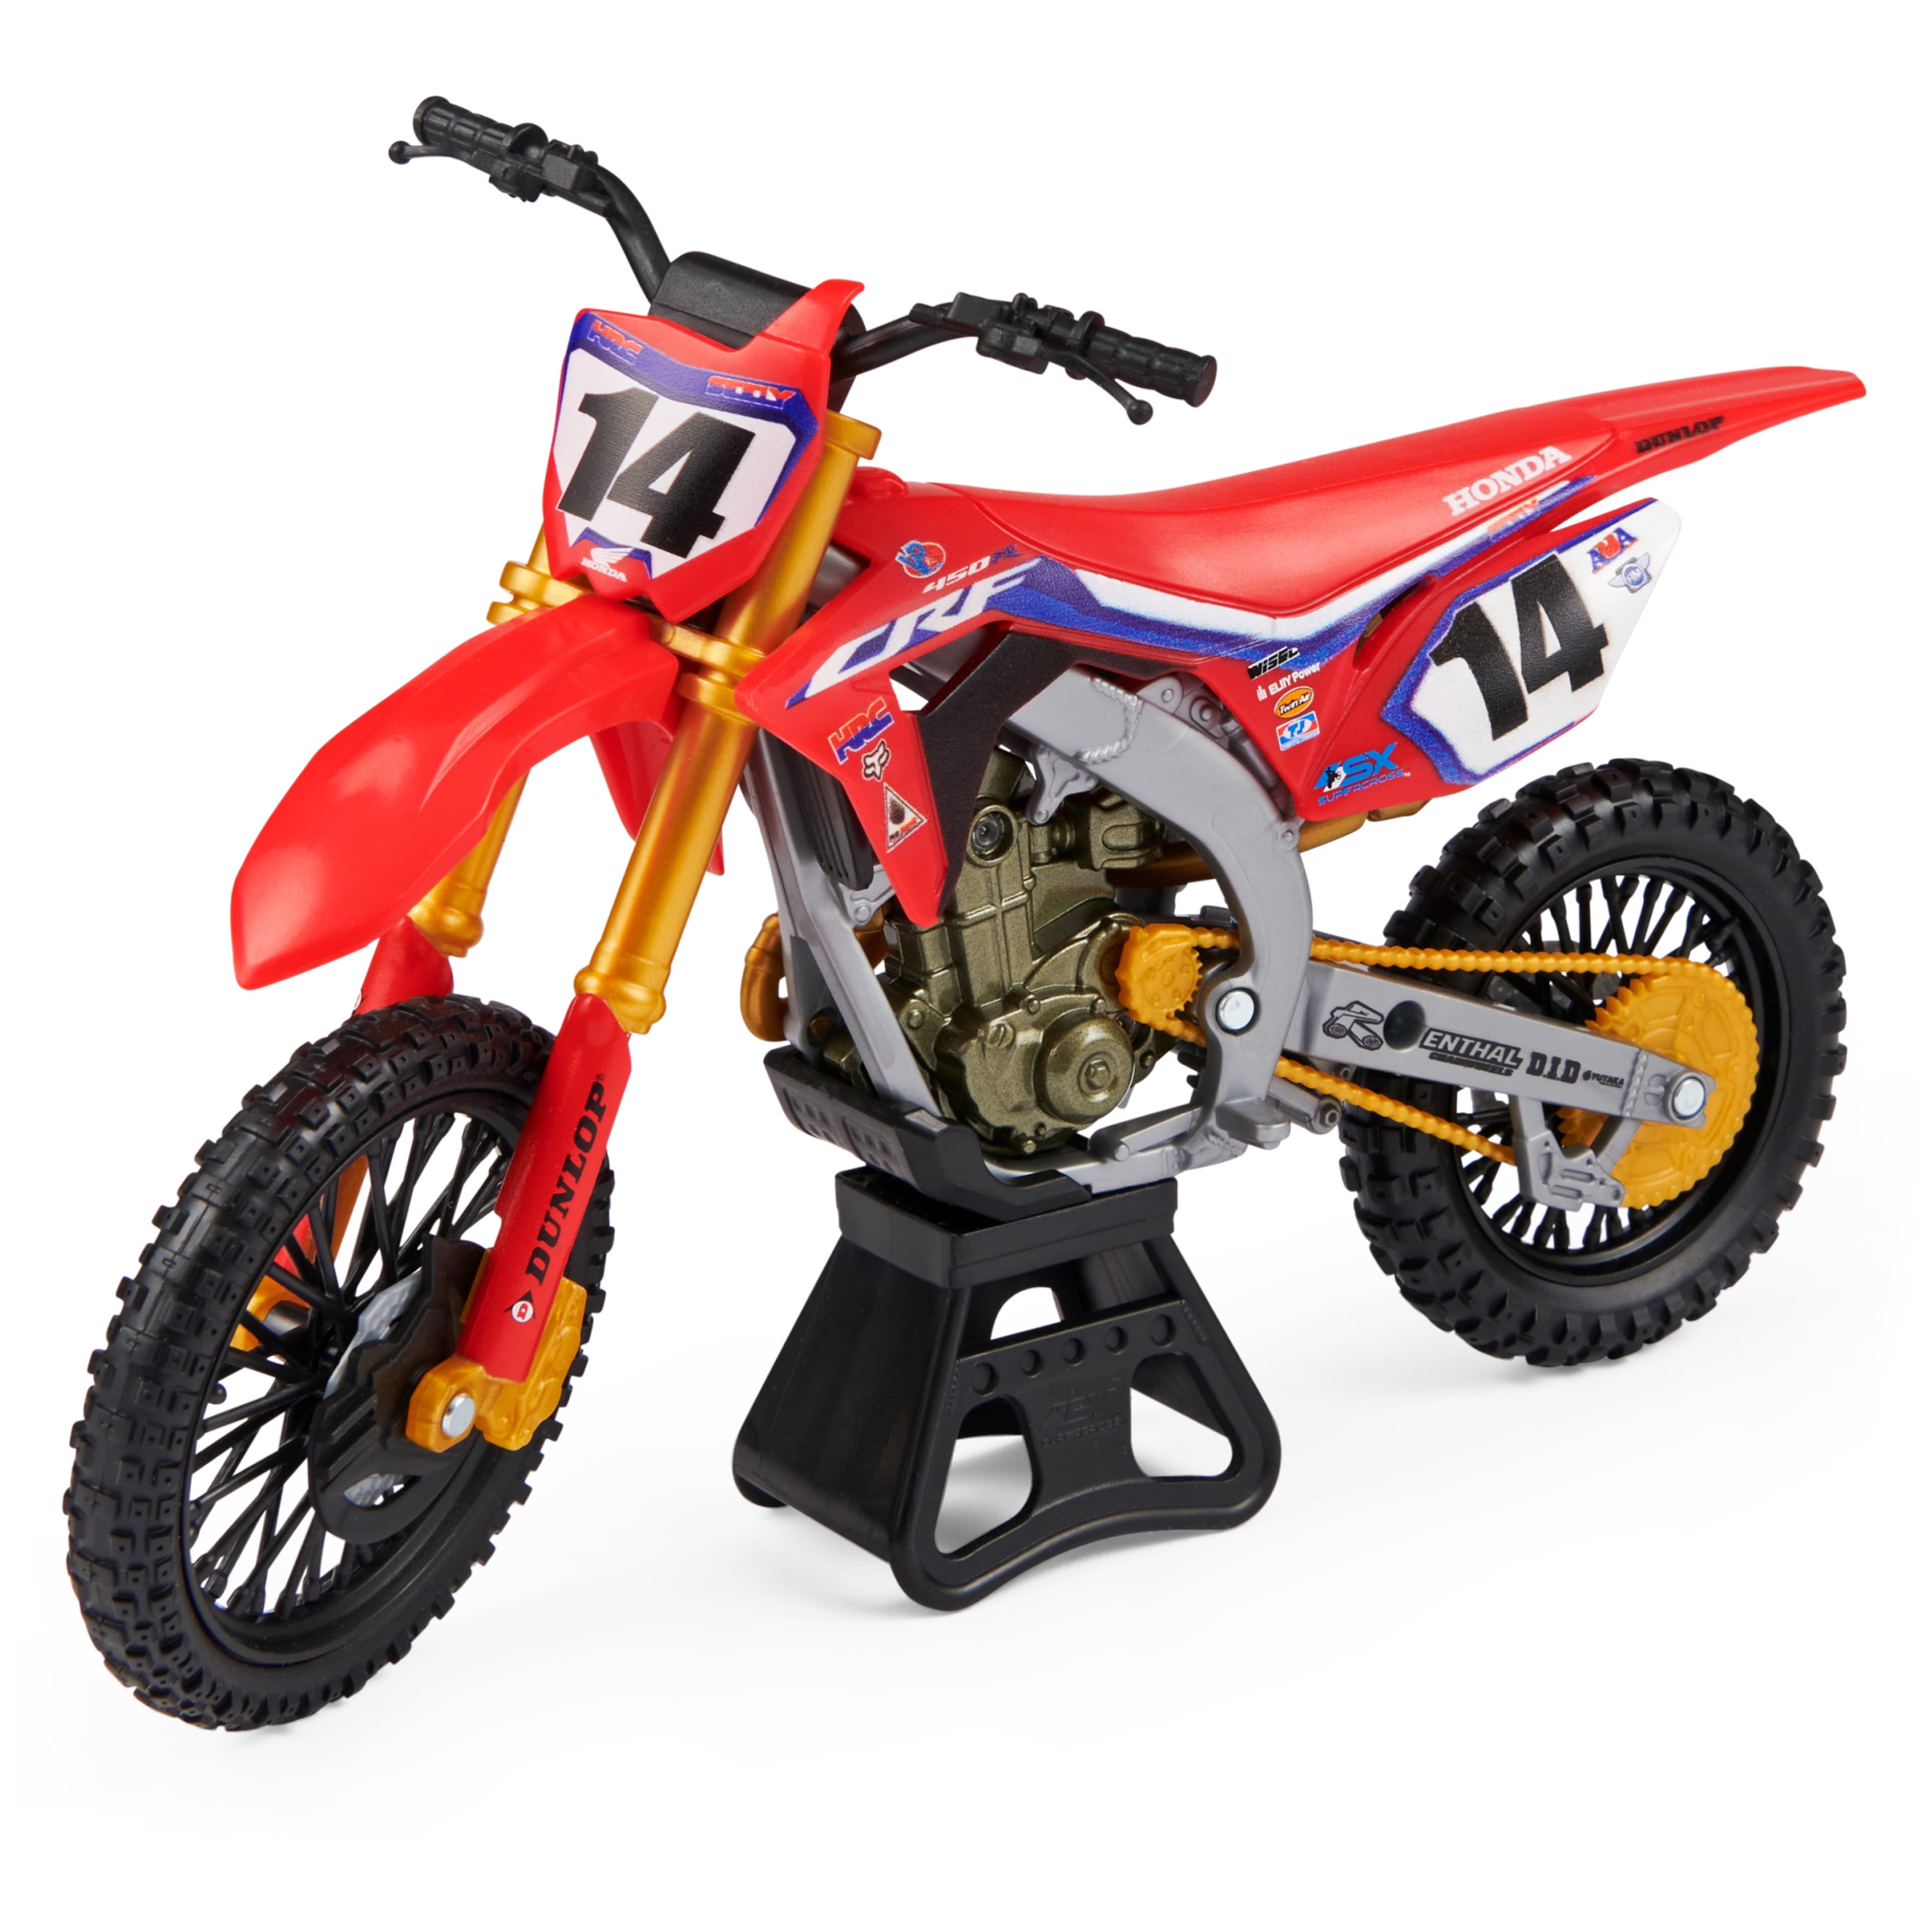 Three Ratels LCS030# 15x15cm Motocross Ride The Bike Colorful Car